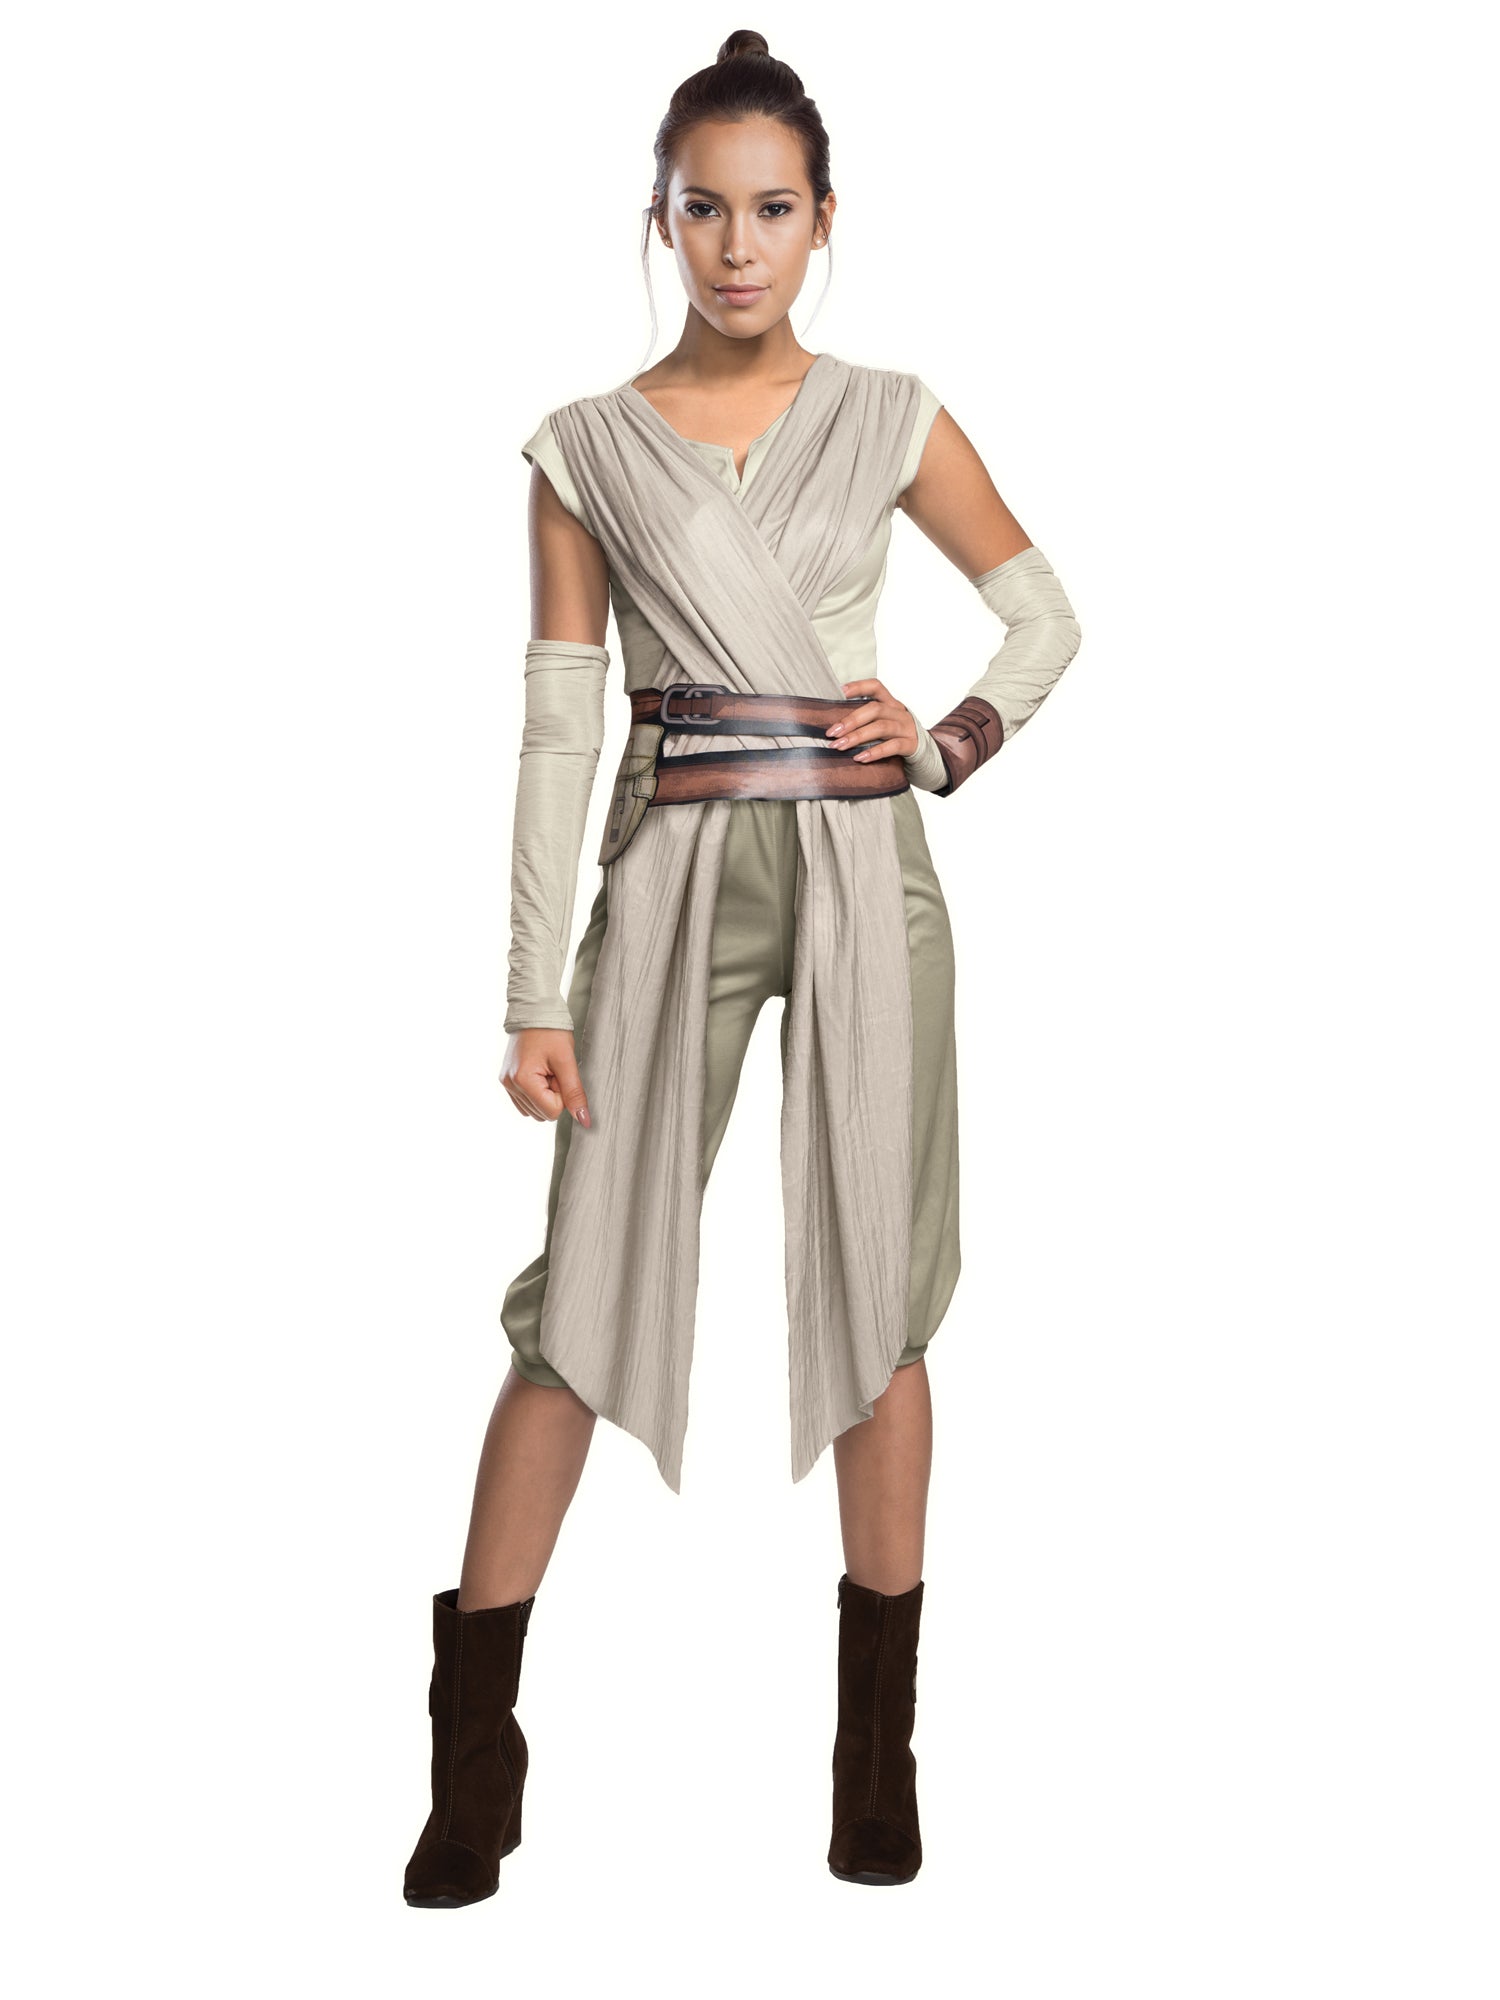 Rey, The Force Awakens, Episode VII, The Force Awakens, Multi, Star Wars, Adult Costume, Small, Front